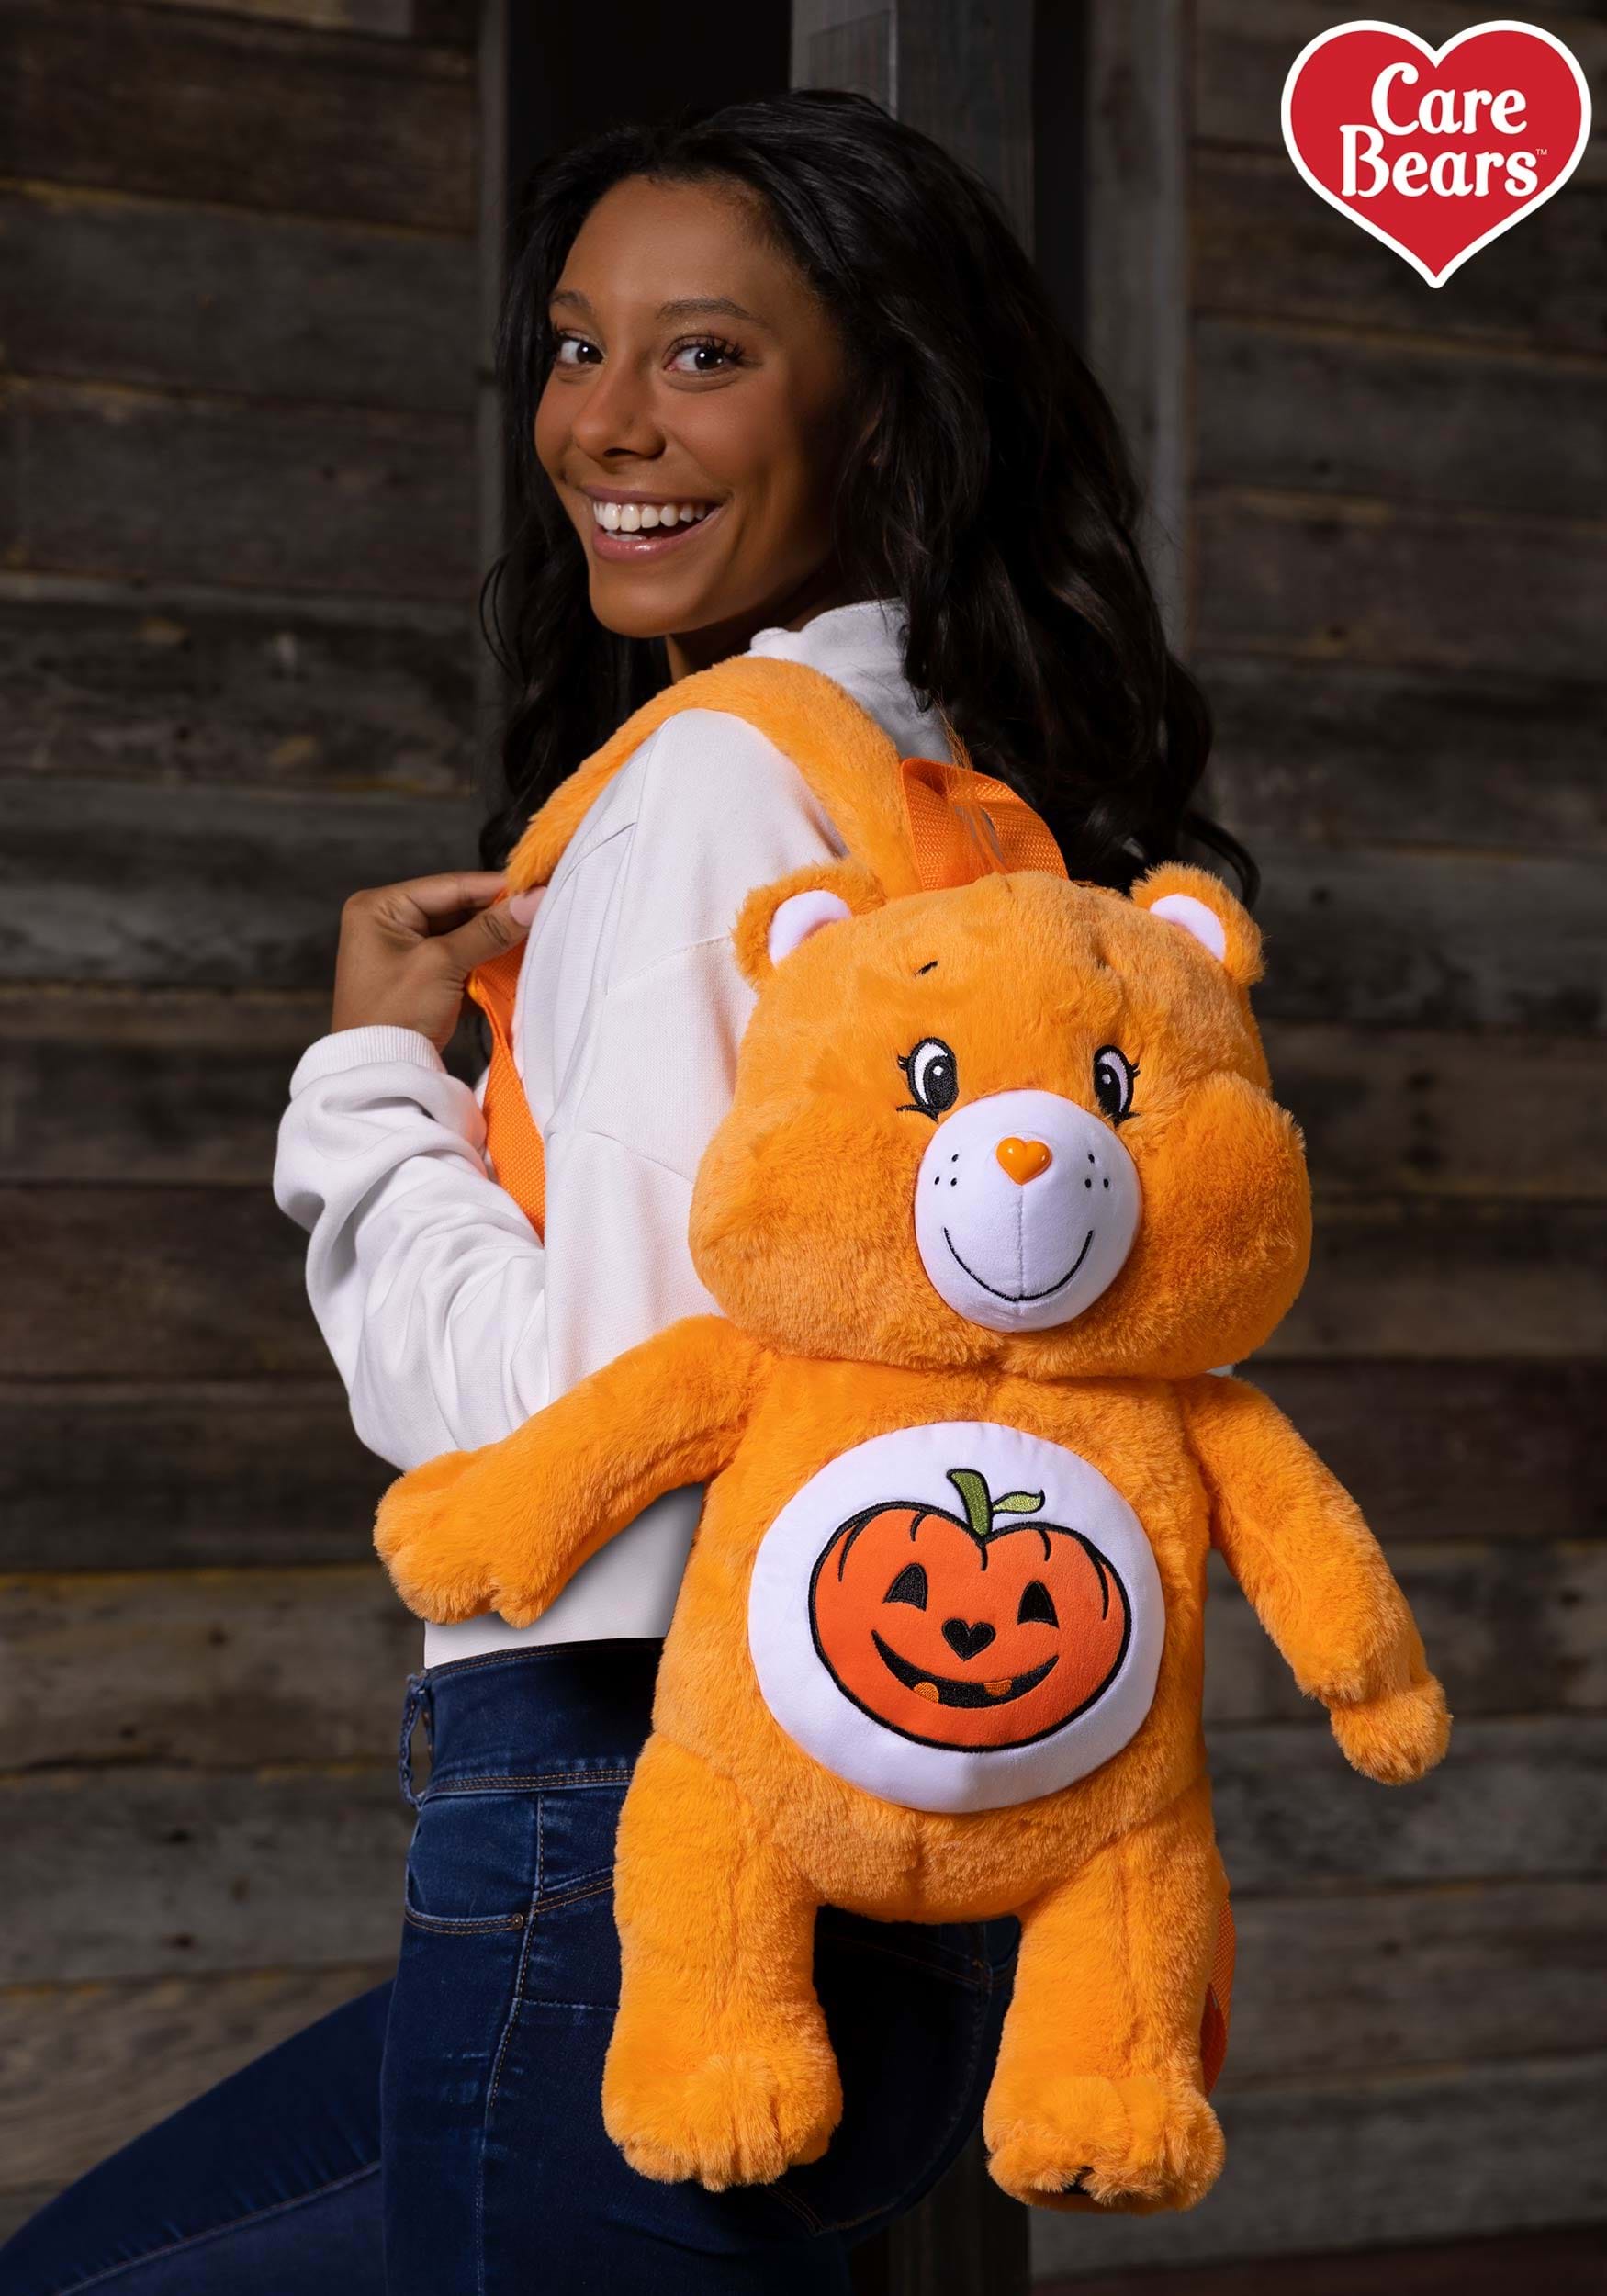 https://images.halloweencostumes.com/products/76832/1-1/trick-or-treat-bear-plush-care-bears-backpack.jpg